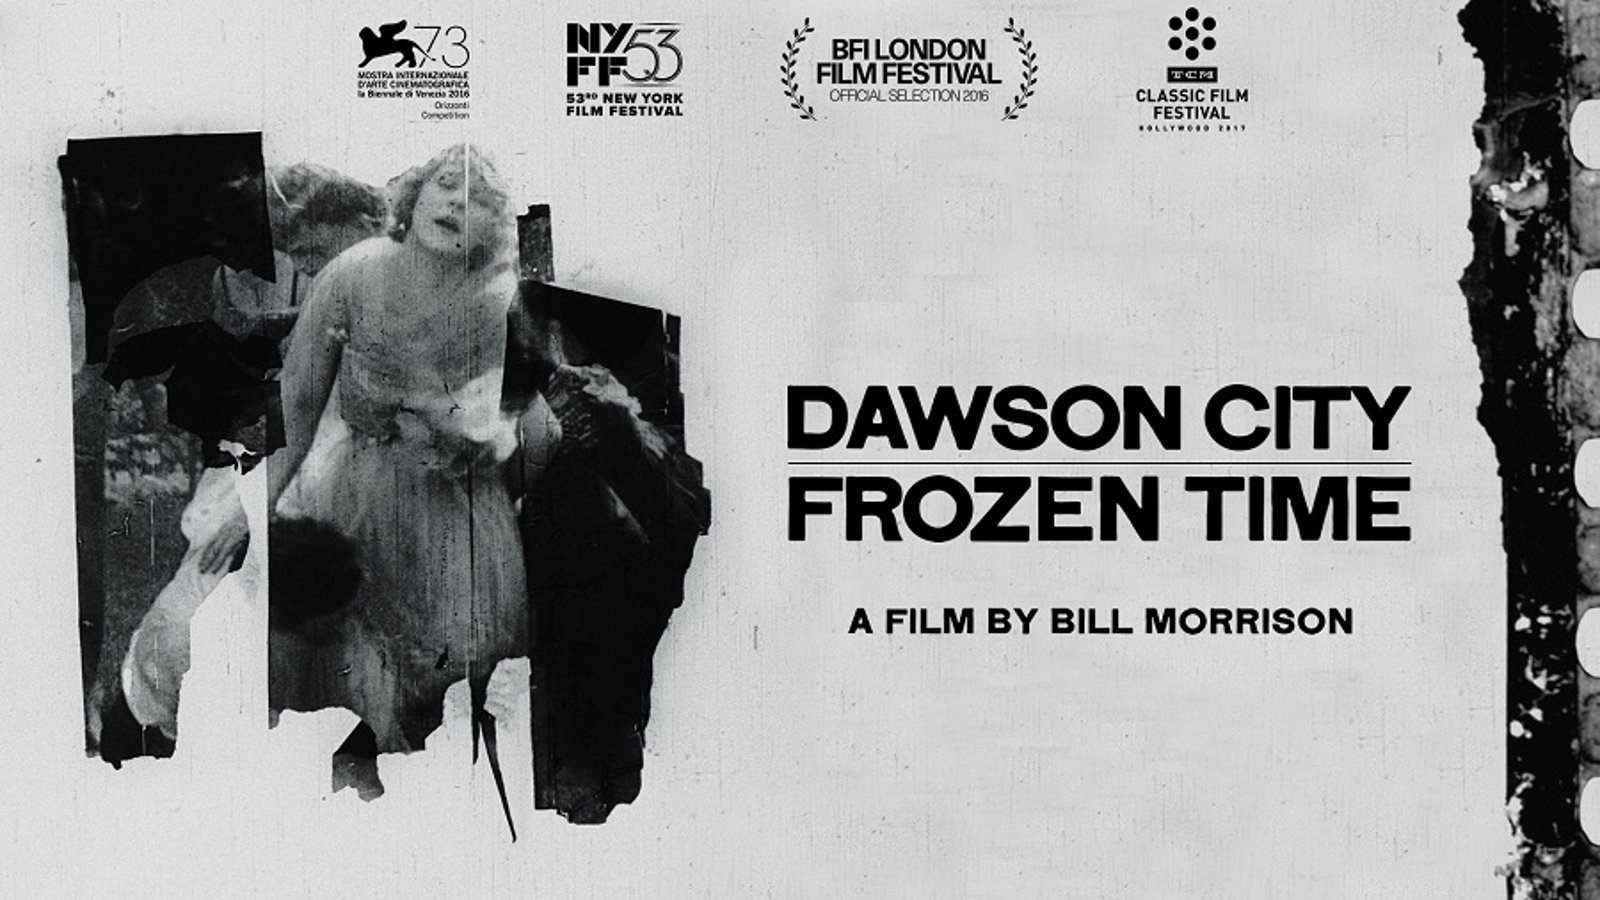 Dawson City: Frozen Time - The Buried History of a Gold Rush Town Found on Nitrate Film